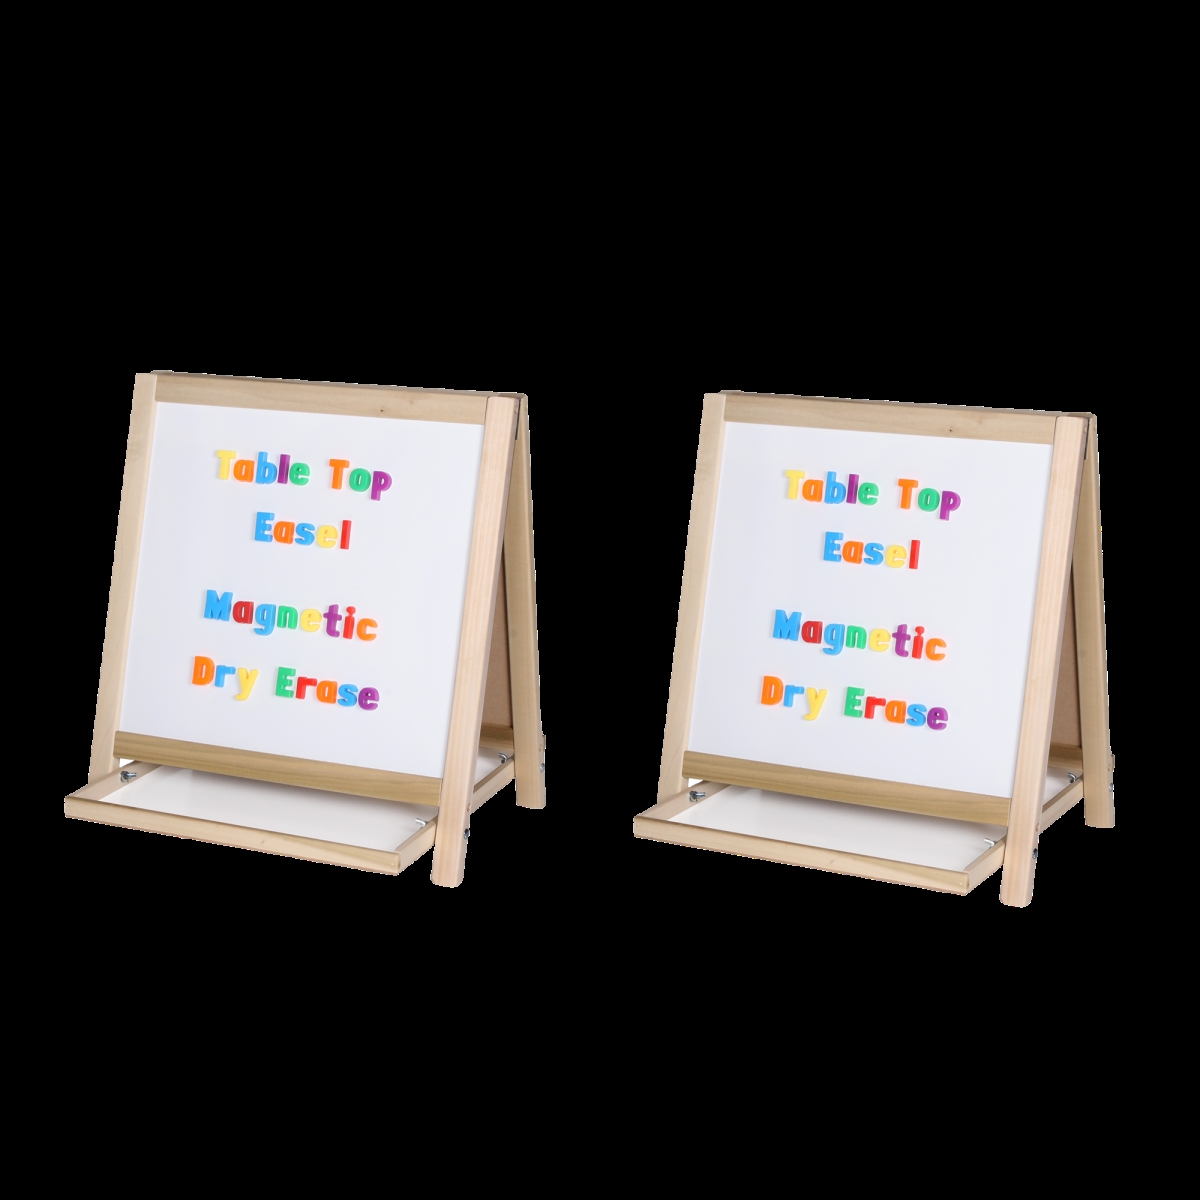 Picture of Flipside Products 19306 Double Sided Magnetic Table Top Easel